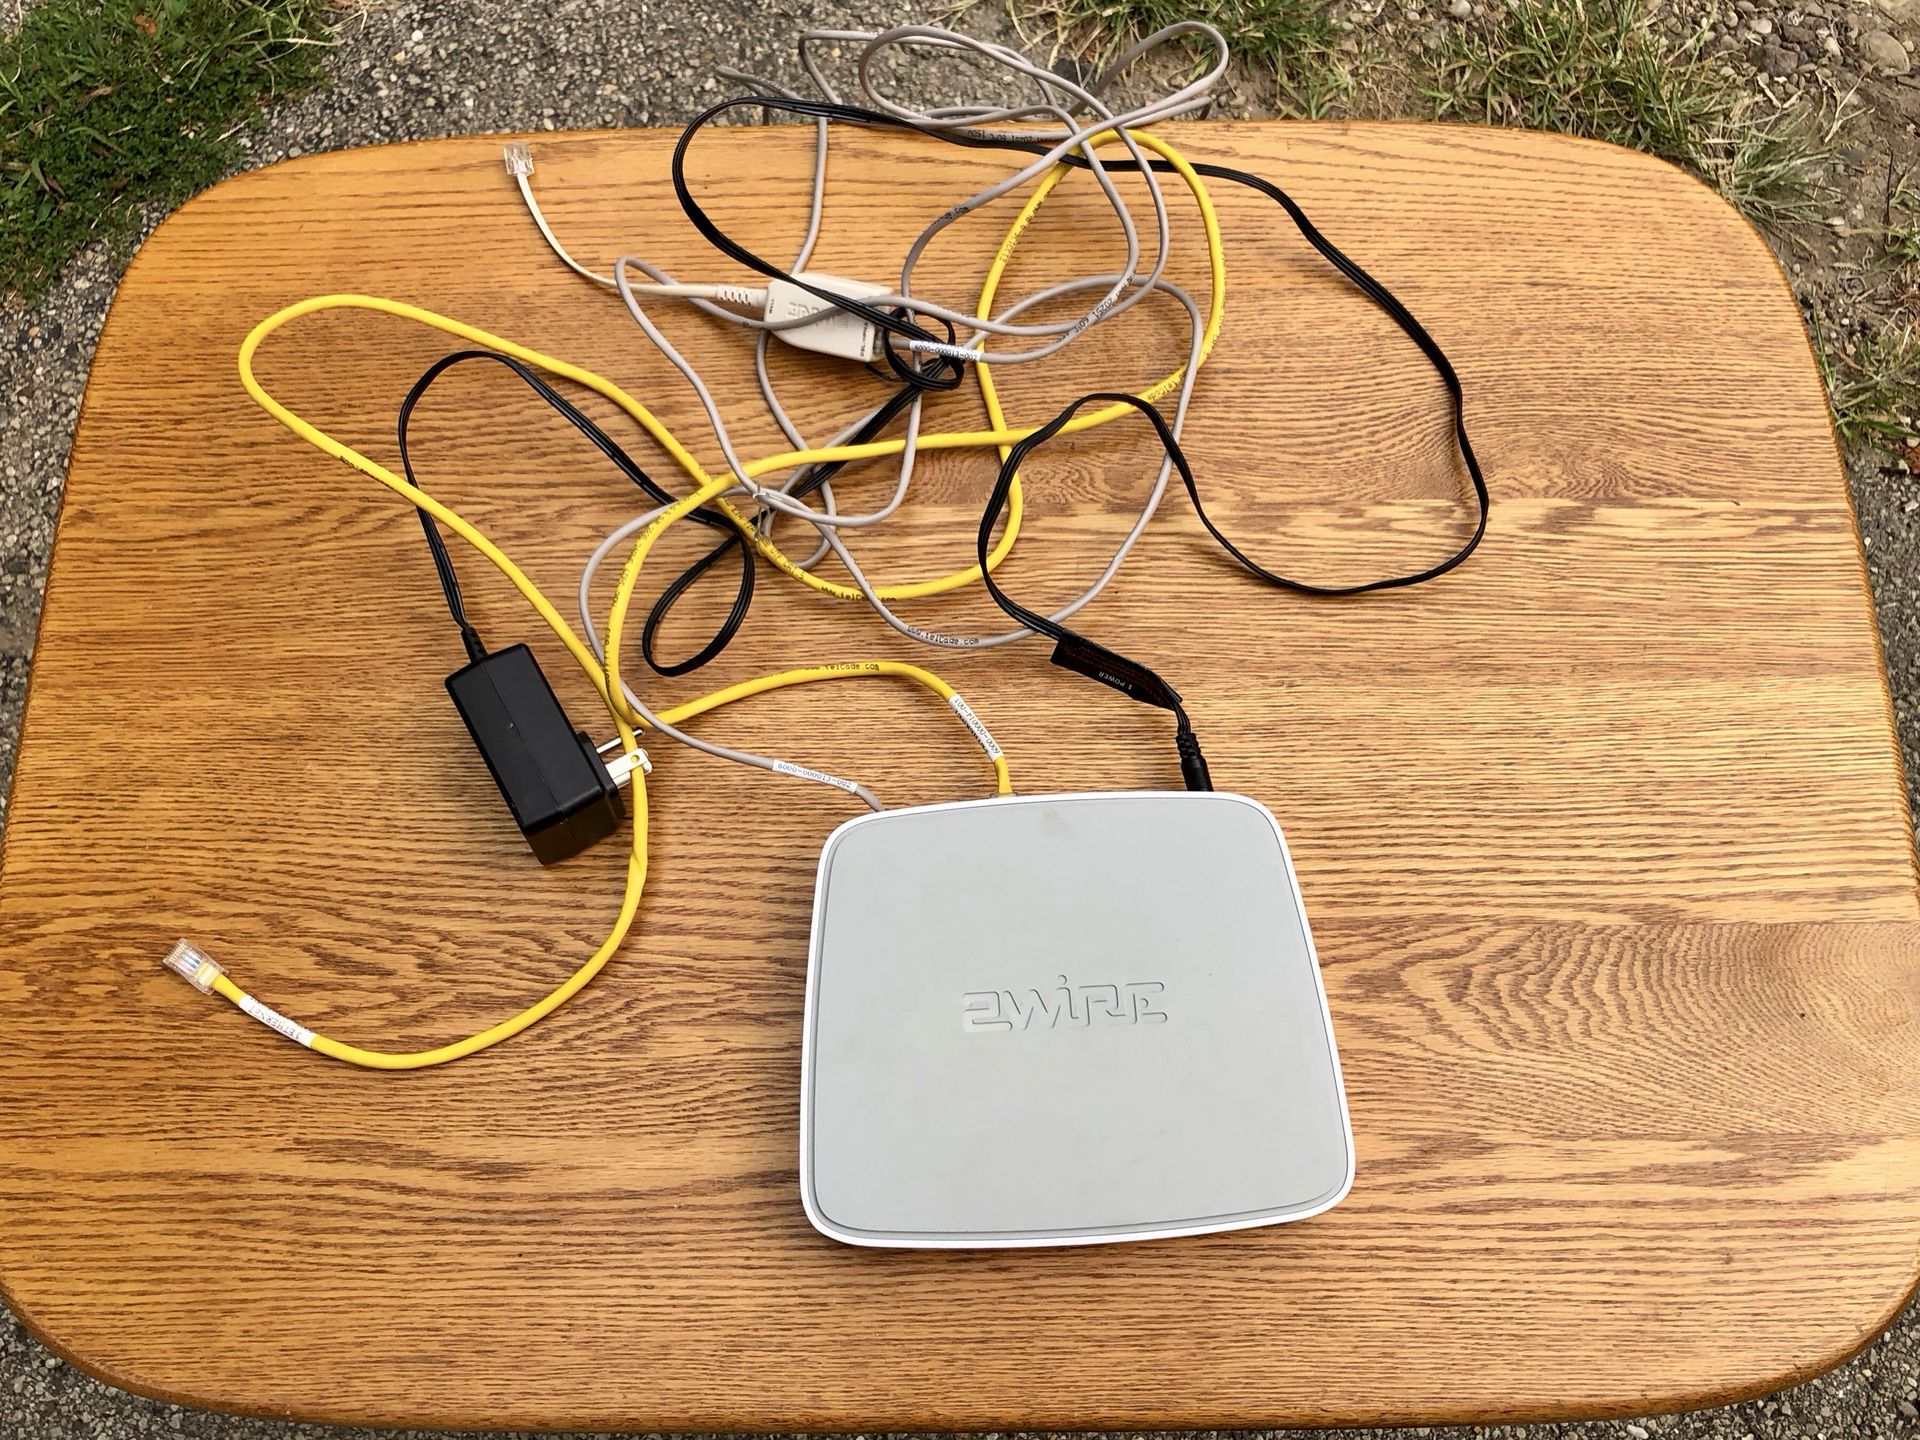 AT&T 2Wire Gateway